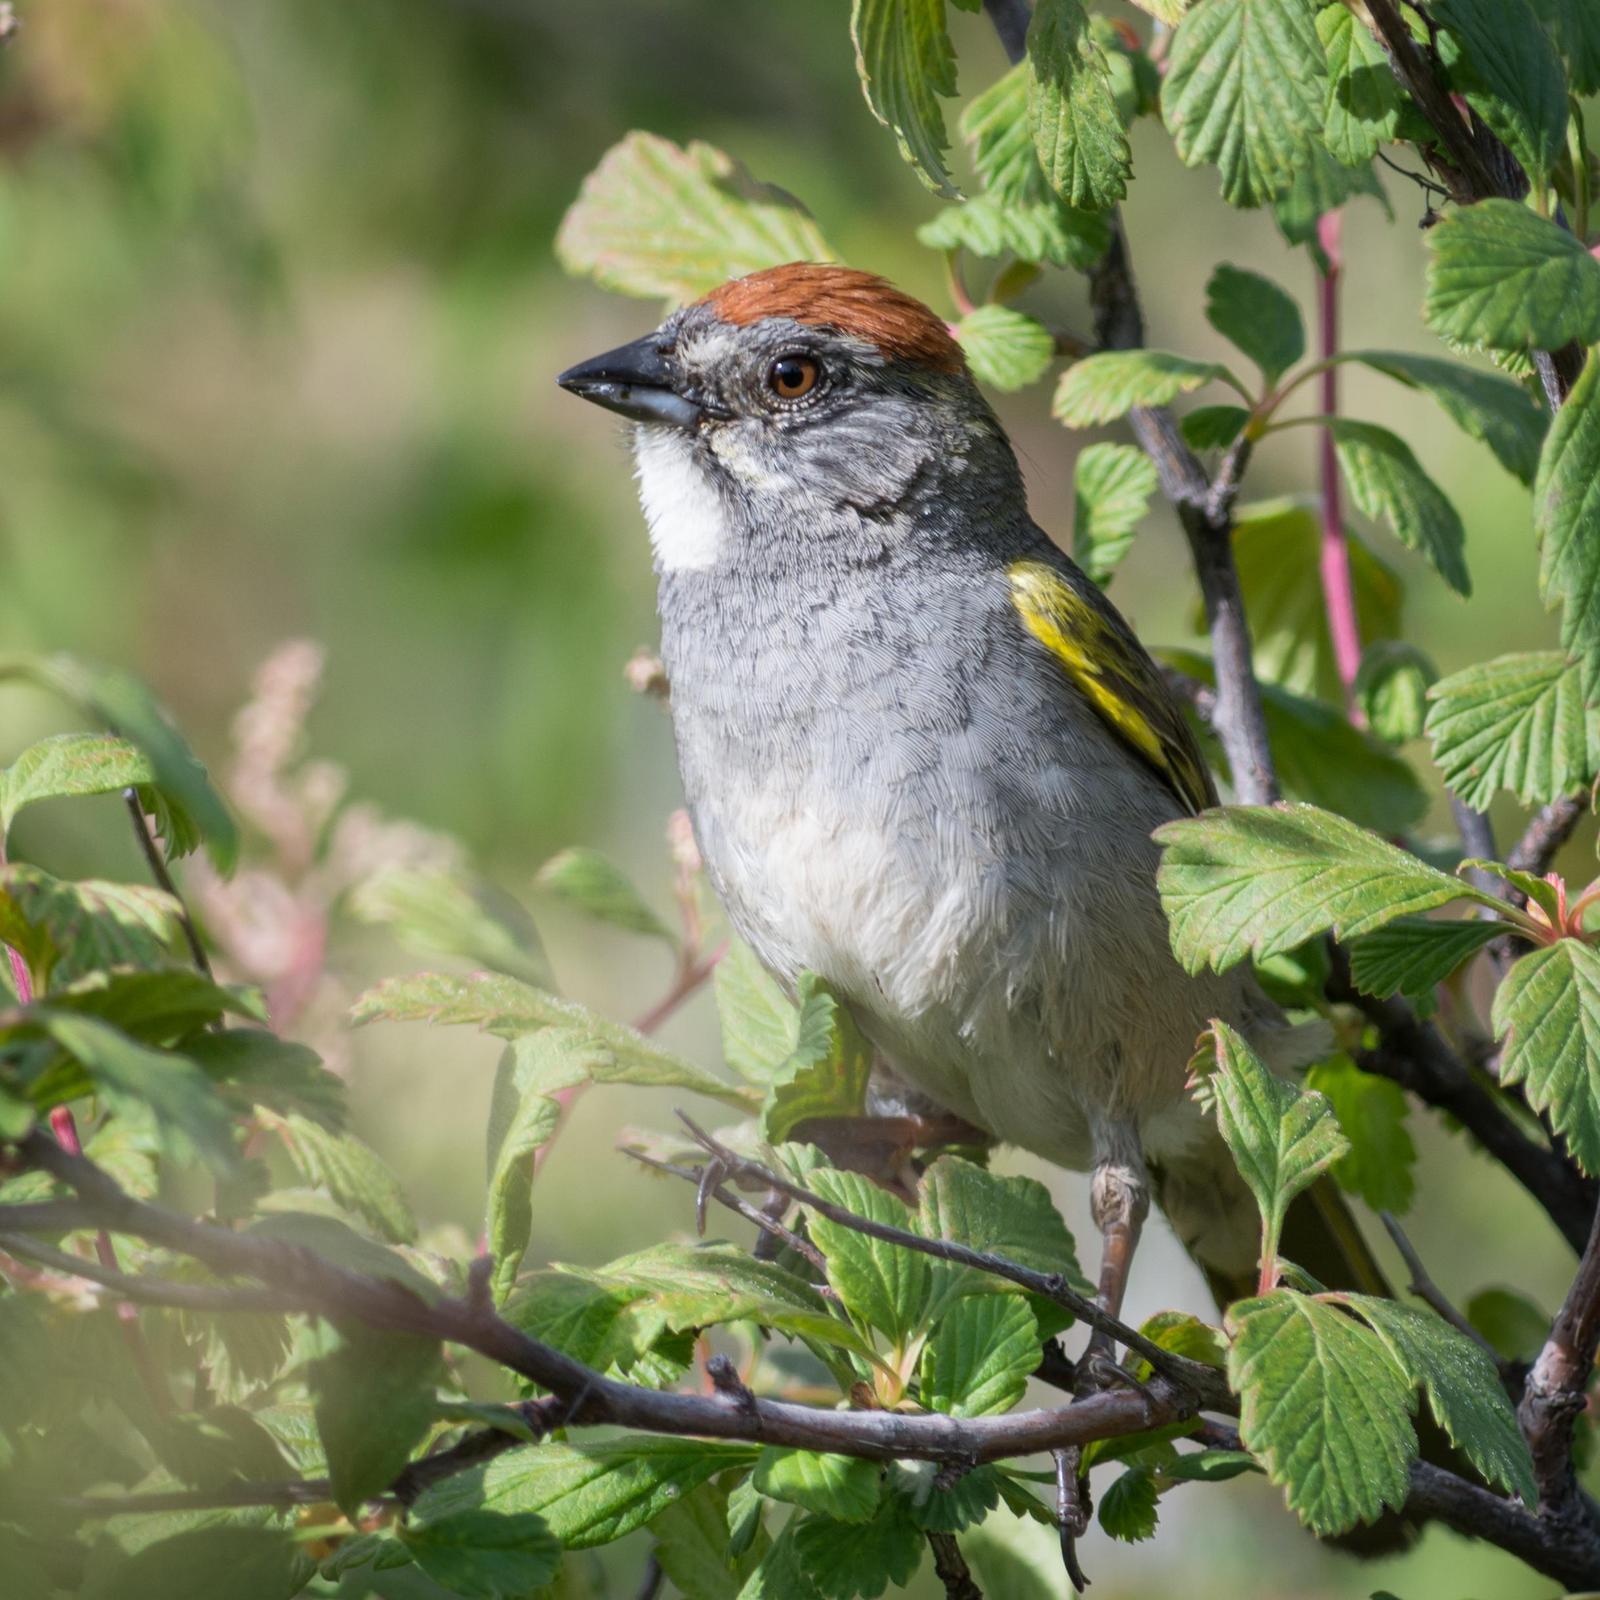 Green-tailed Towhee Photo by Jesse Hodges